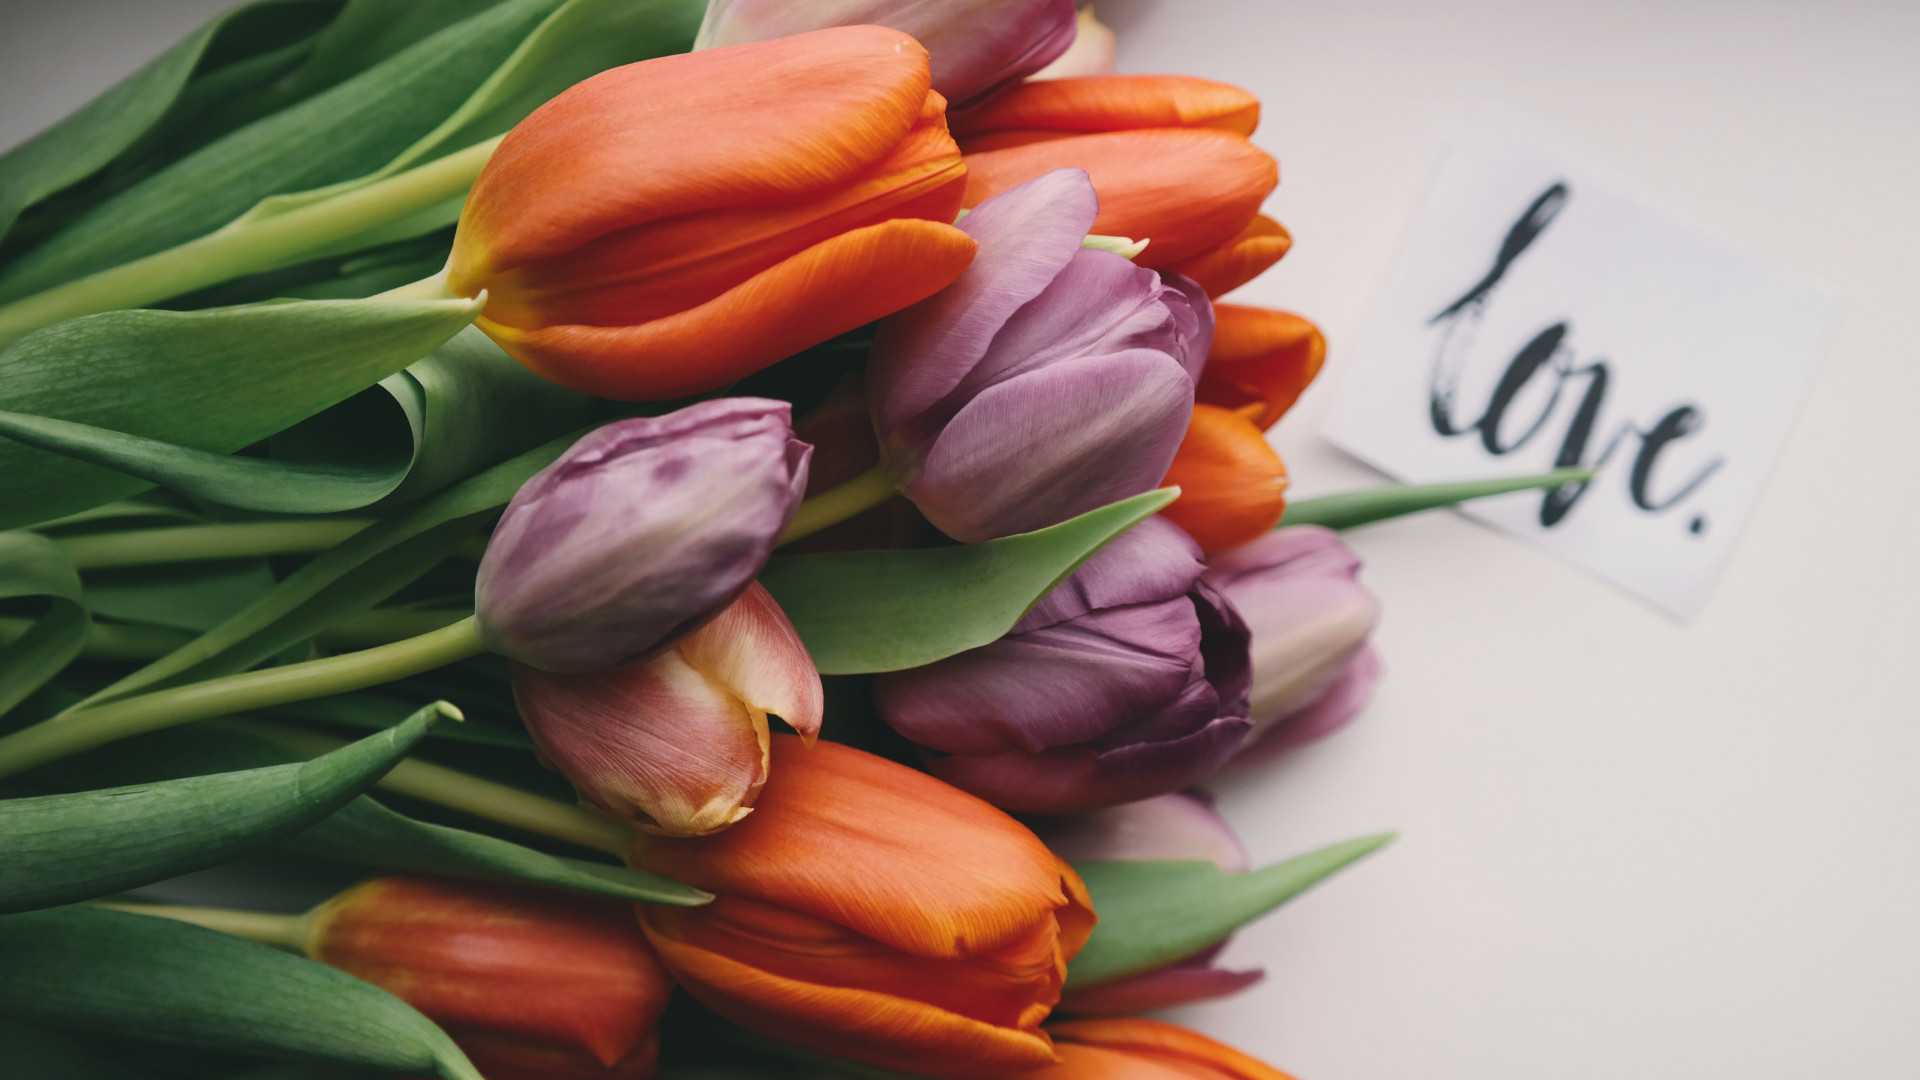 Tulips with love wallpaper 1920x1080